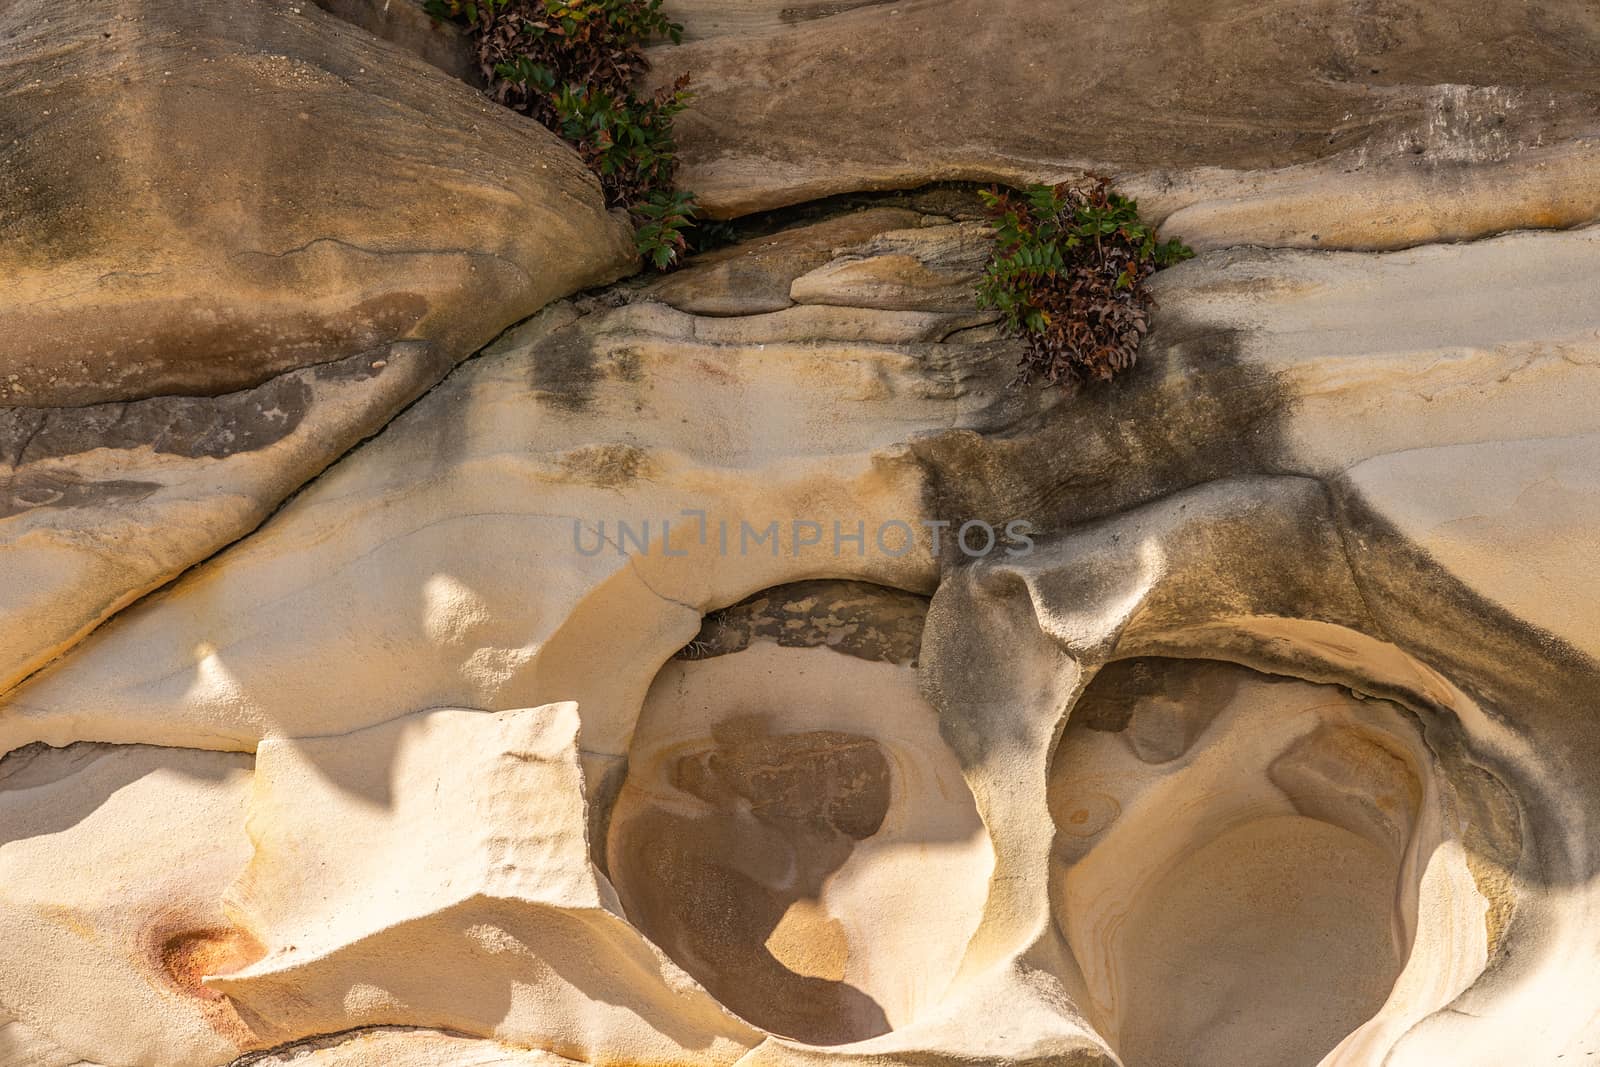 Sydney, Australia - February 11, 2019: Closeup of bucket like rock formation made by erosion on South shore cliffs overlooking Bronte Beach. Dominant yellows and browns.